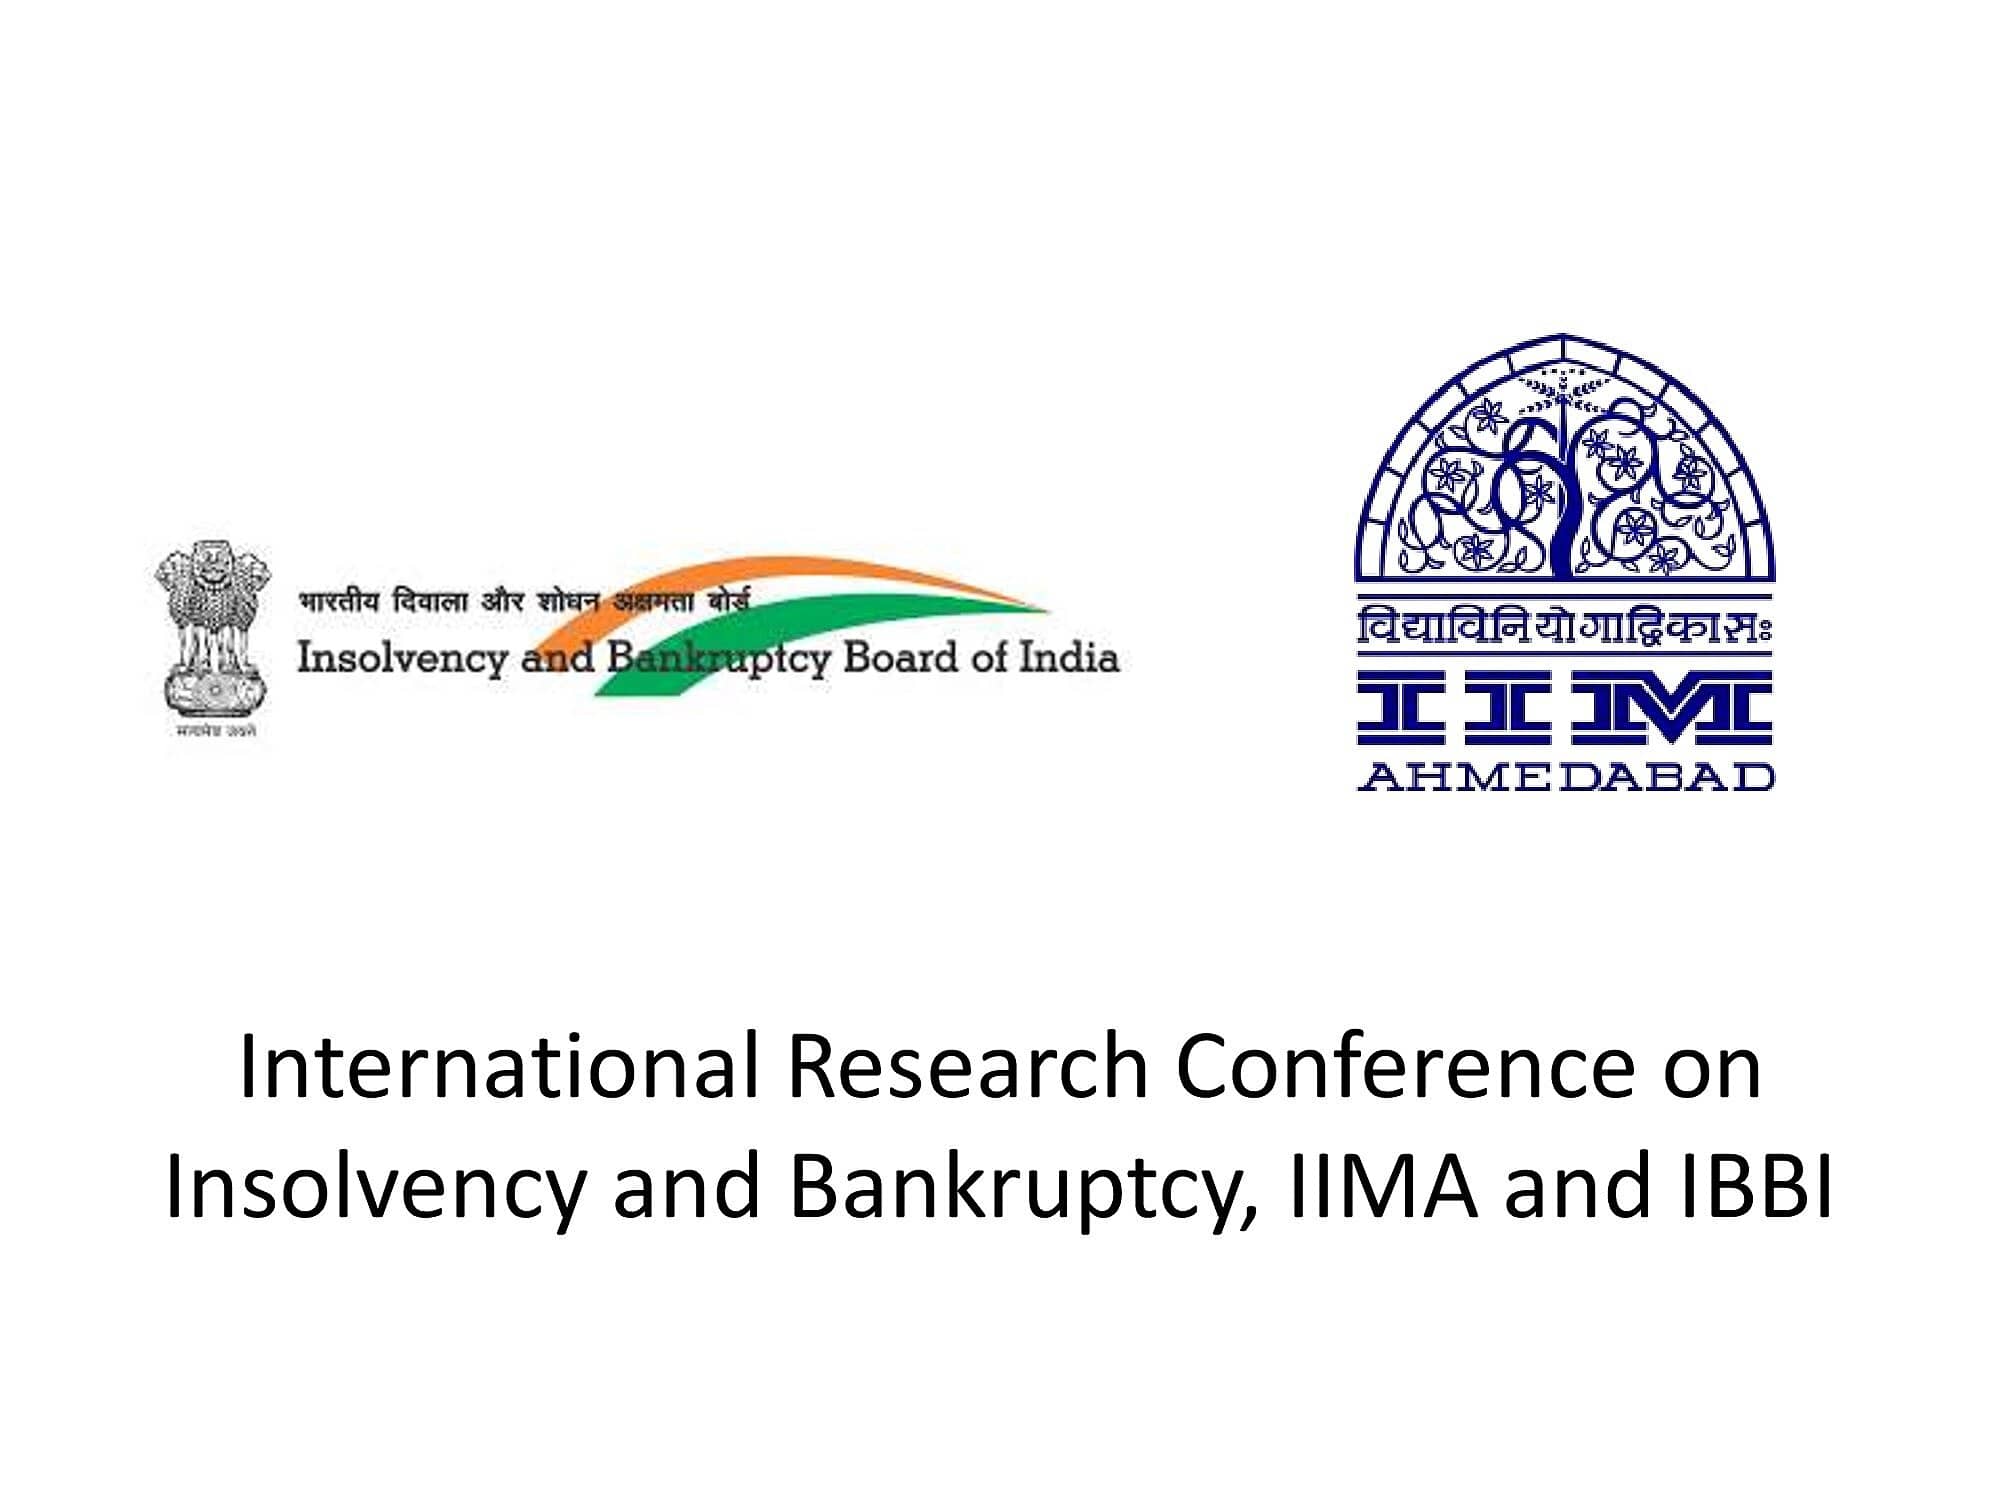 First   International   Research   Conference   on   Insolvency   and   Bankruptcy   being organized   by  Insolvency  and   Bankruptcy  Board  of  India   in   association   with   IIM Ahmedabad on 30	th  April- 1 st  May 2022.